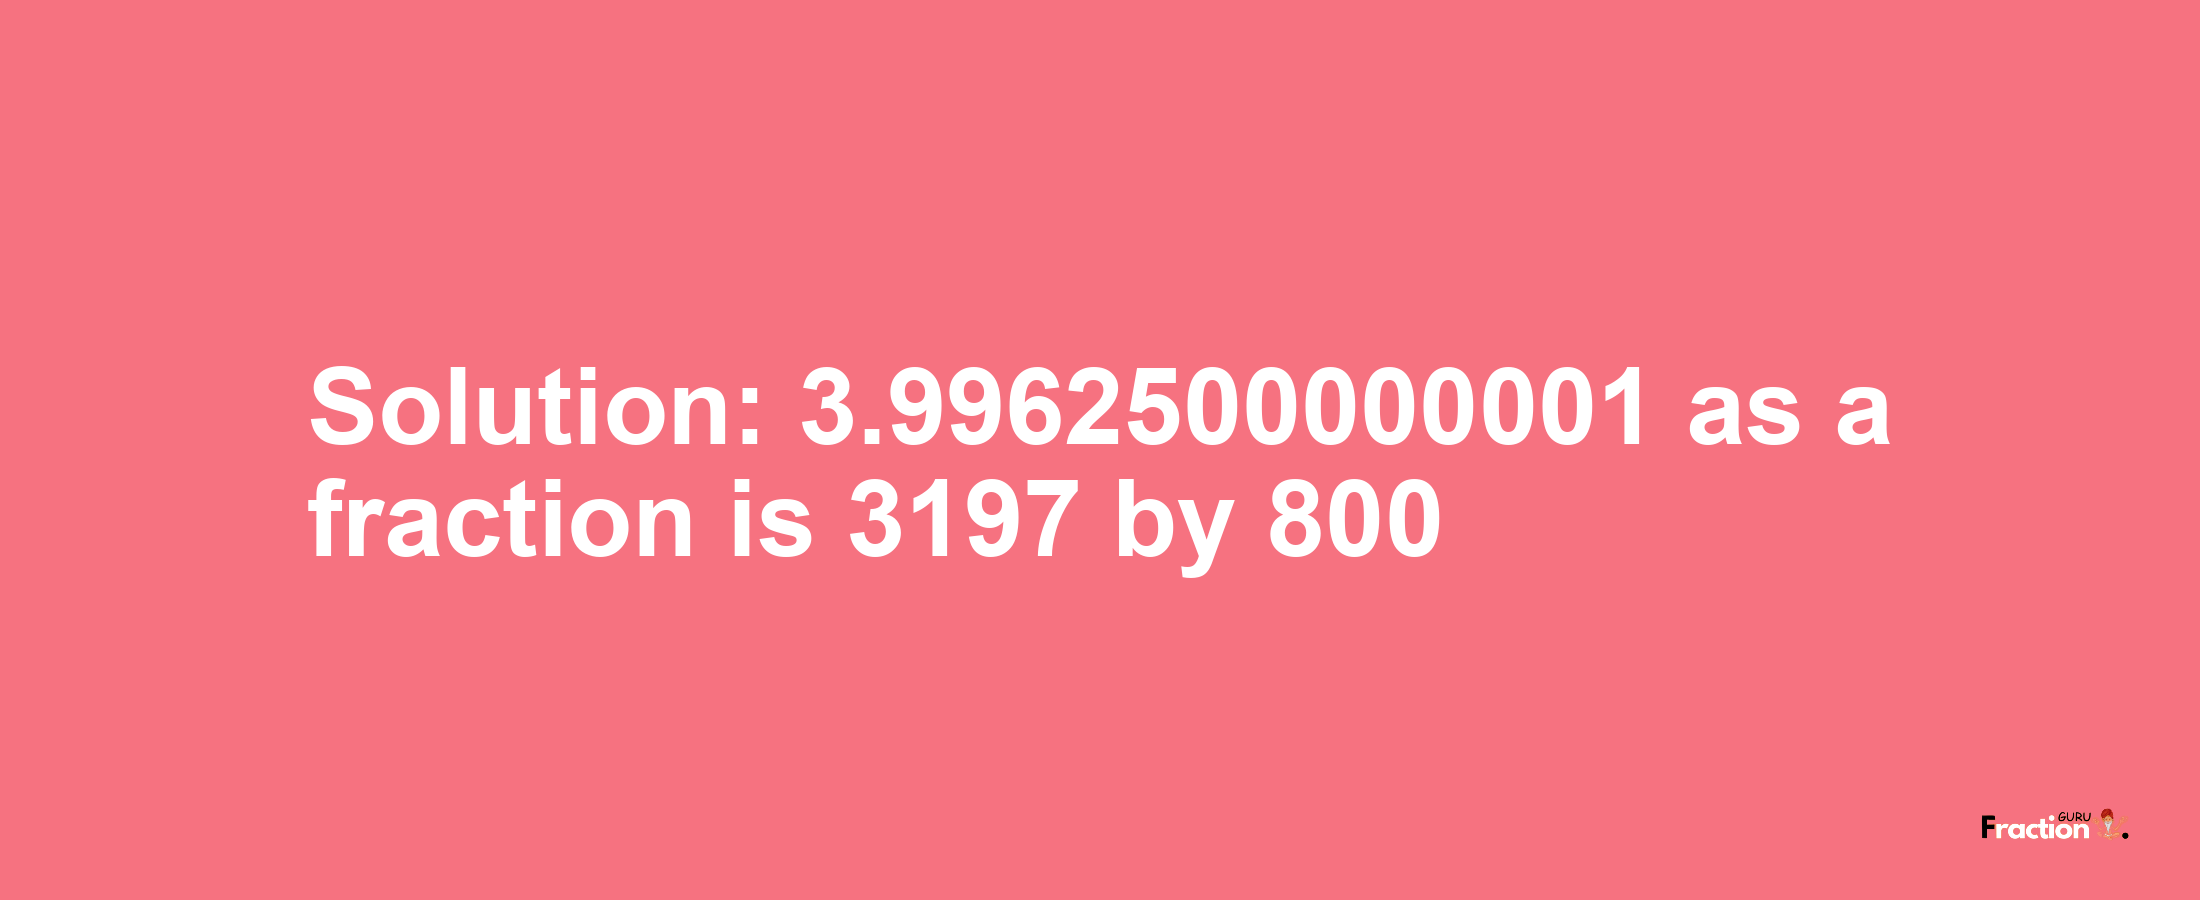 Solution:3.9962500000001 as a fraction is 3197/800